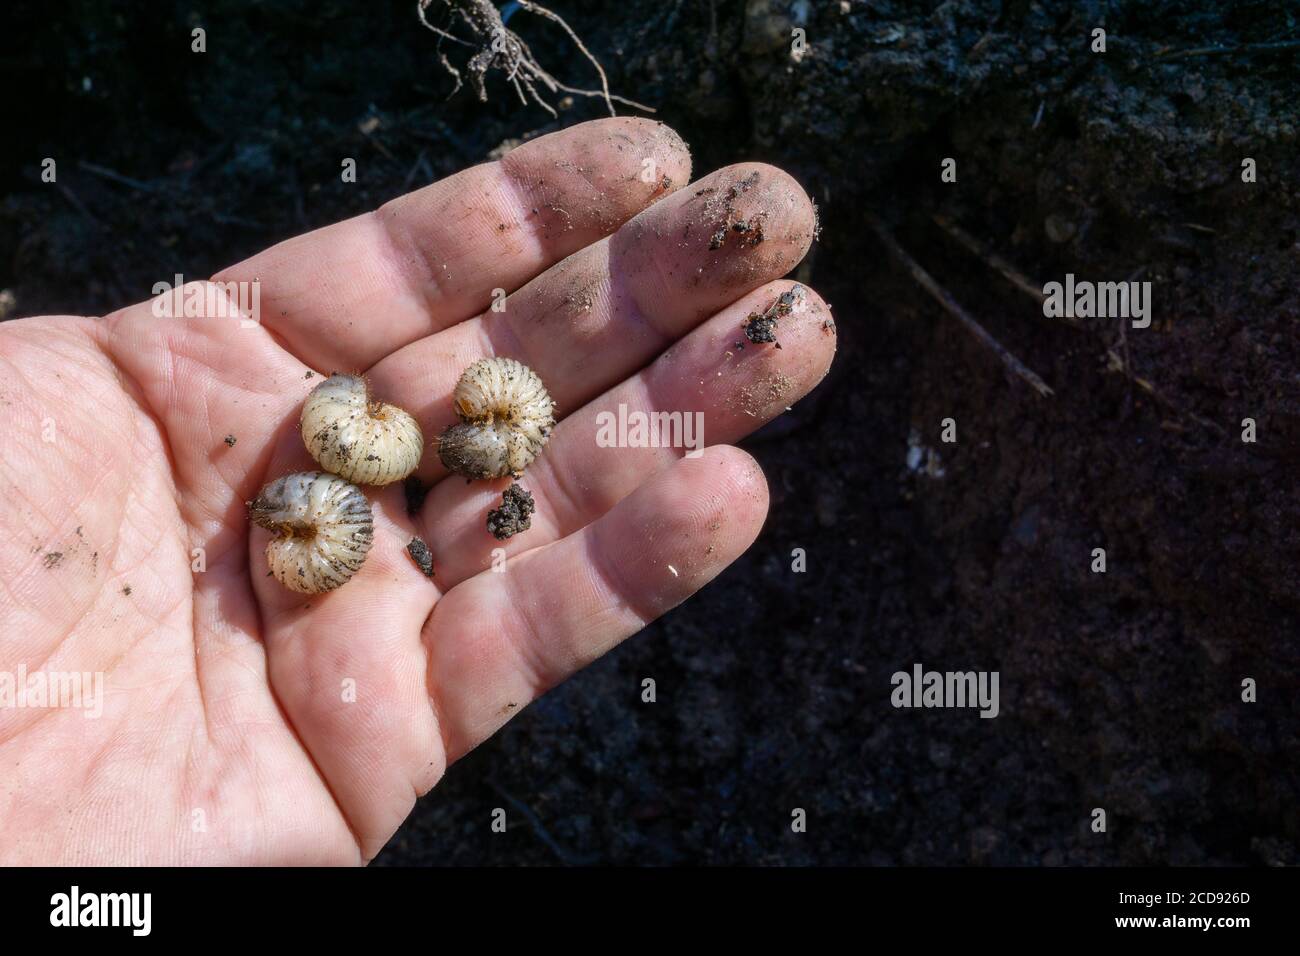 three Grub Worms In a Human Hand Stock Photo